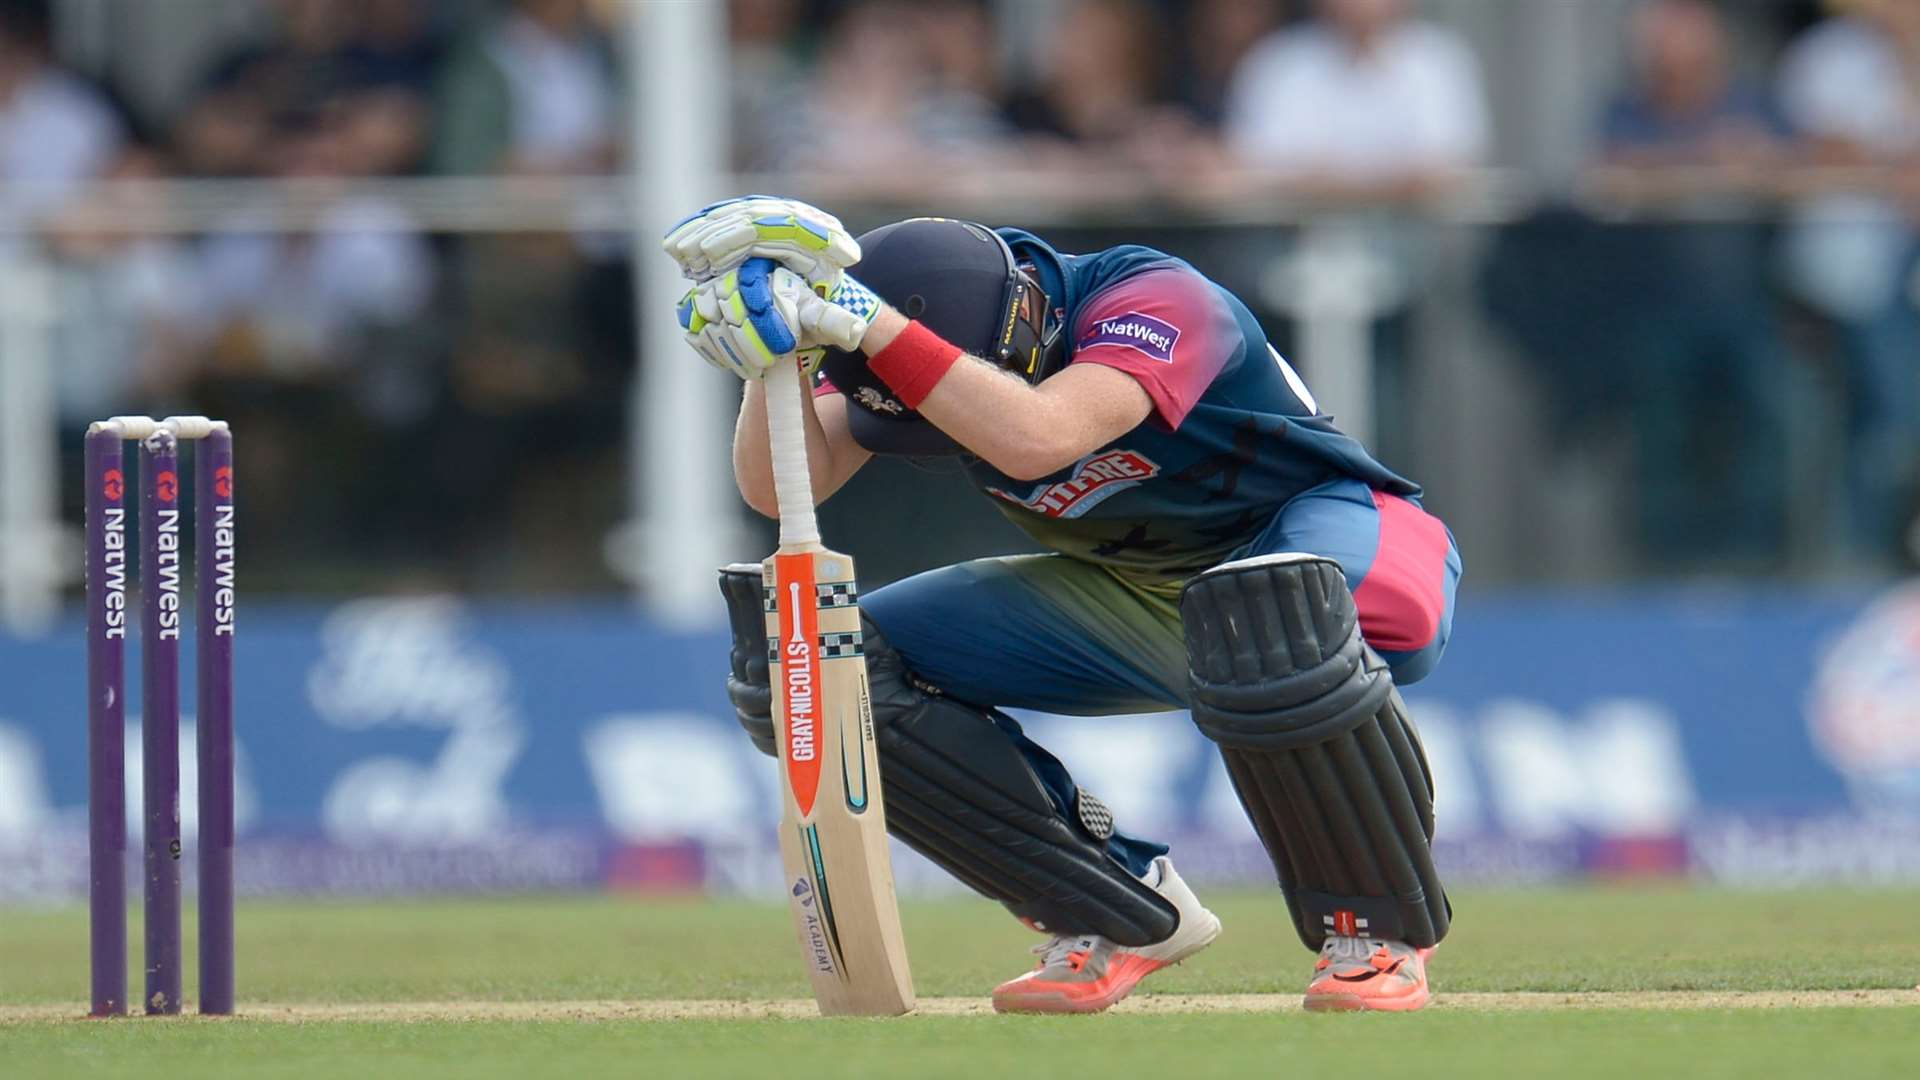 Sam Billings on his haunches after being caught by Jos Buttler. Picture: Ady Kerry